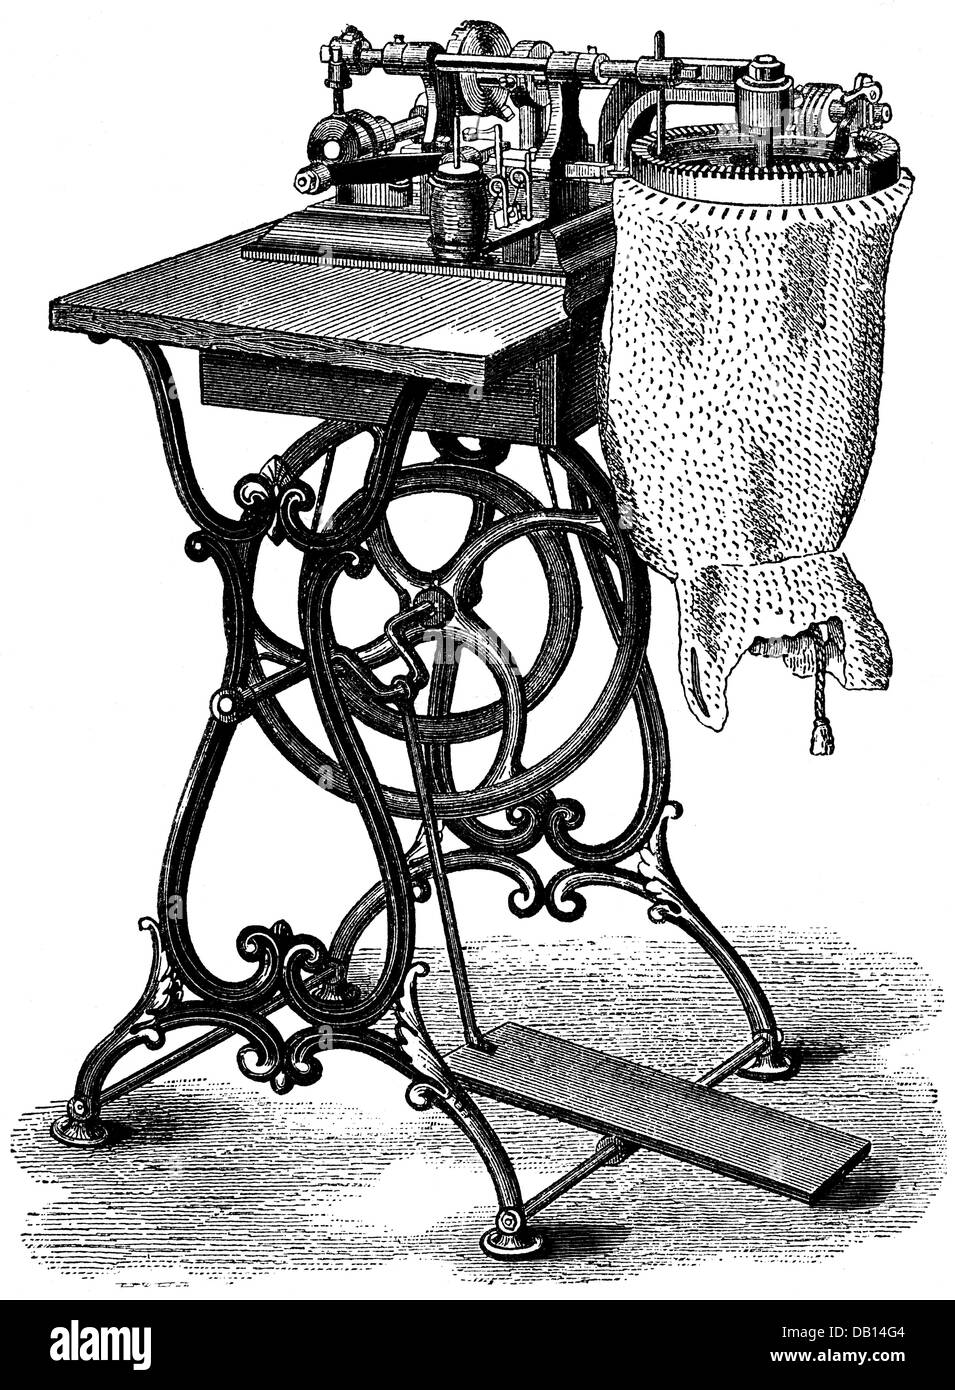 household, sewing and sewing machines, circular sewing machine, made by: C.Terrot, Chemnitz, wood engraving, 19th century, 19th century, graphic, graphics, engineering, technology, technologies, progress, sewing, sew, household, households, sewing machine, sewing machines, circular knitting machine, knitting machines, historic, historical, Additional-Rights-Clearences-Not Available Stock Photo